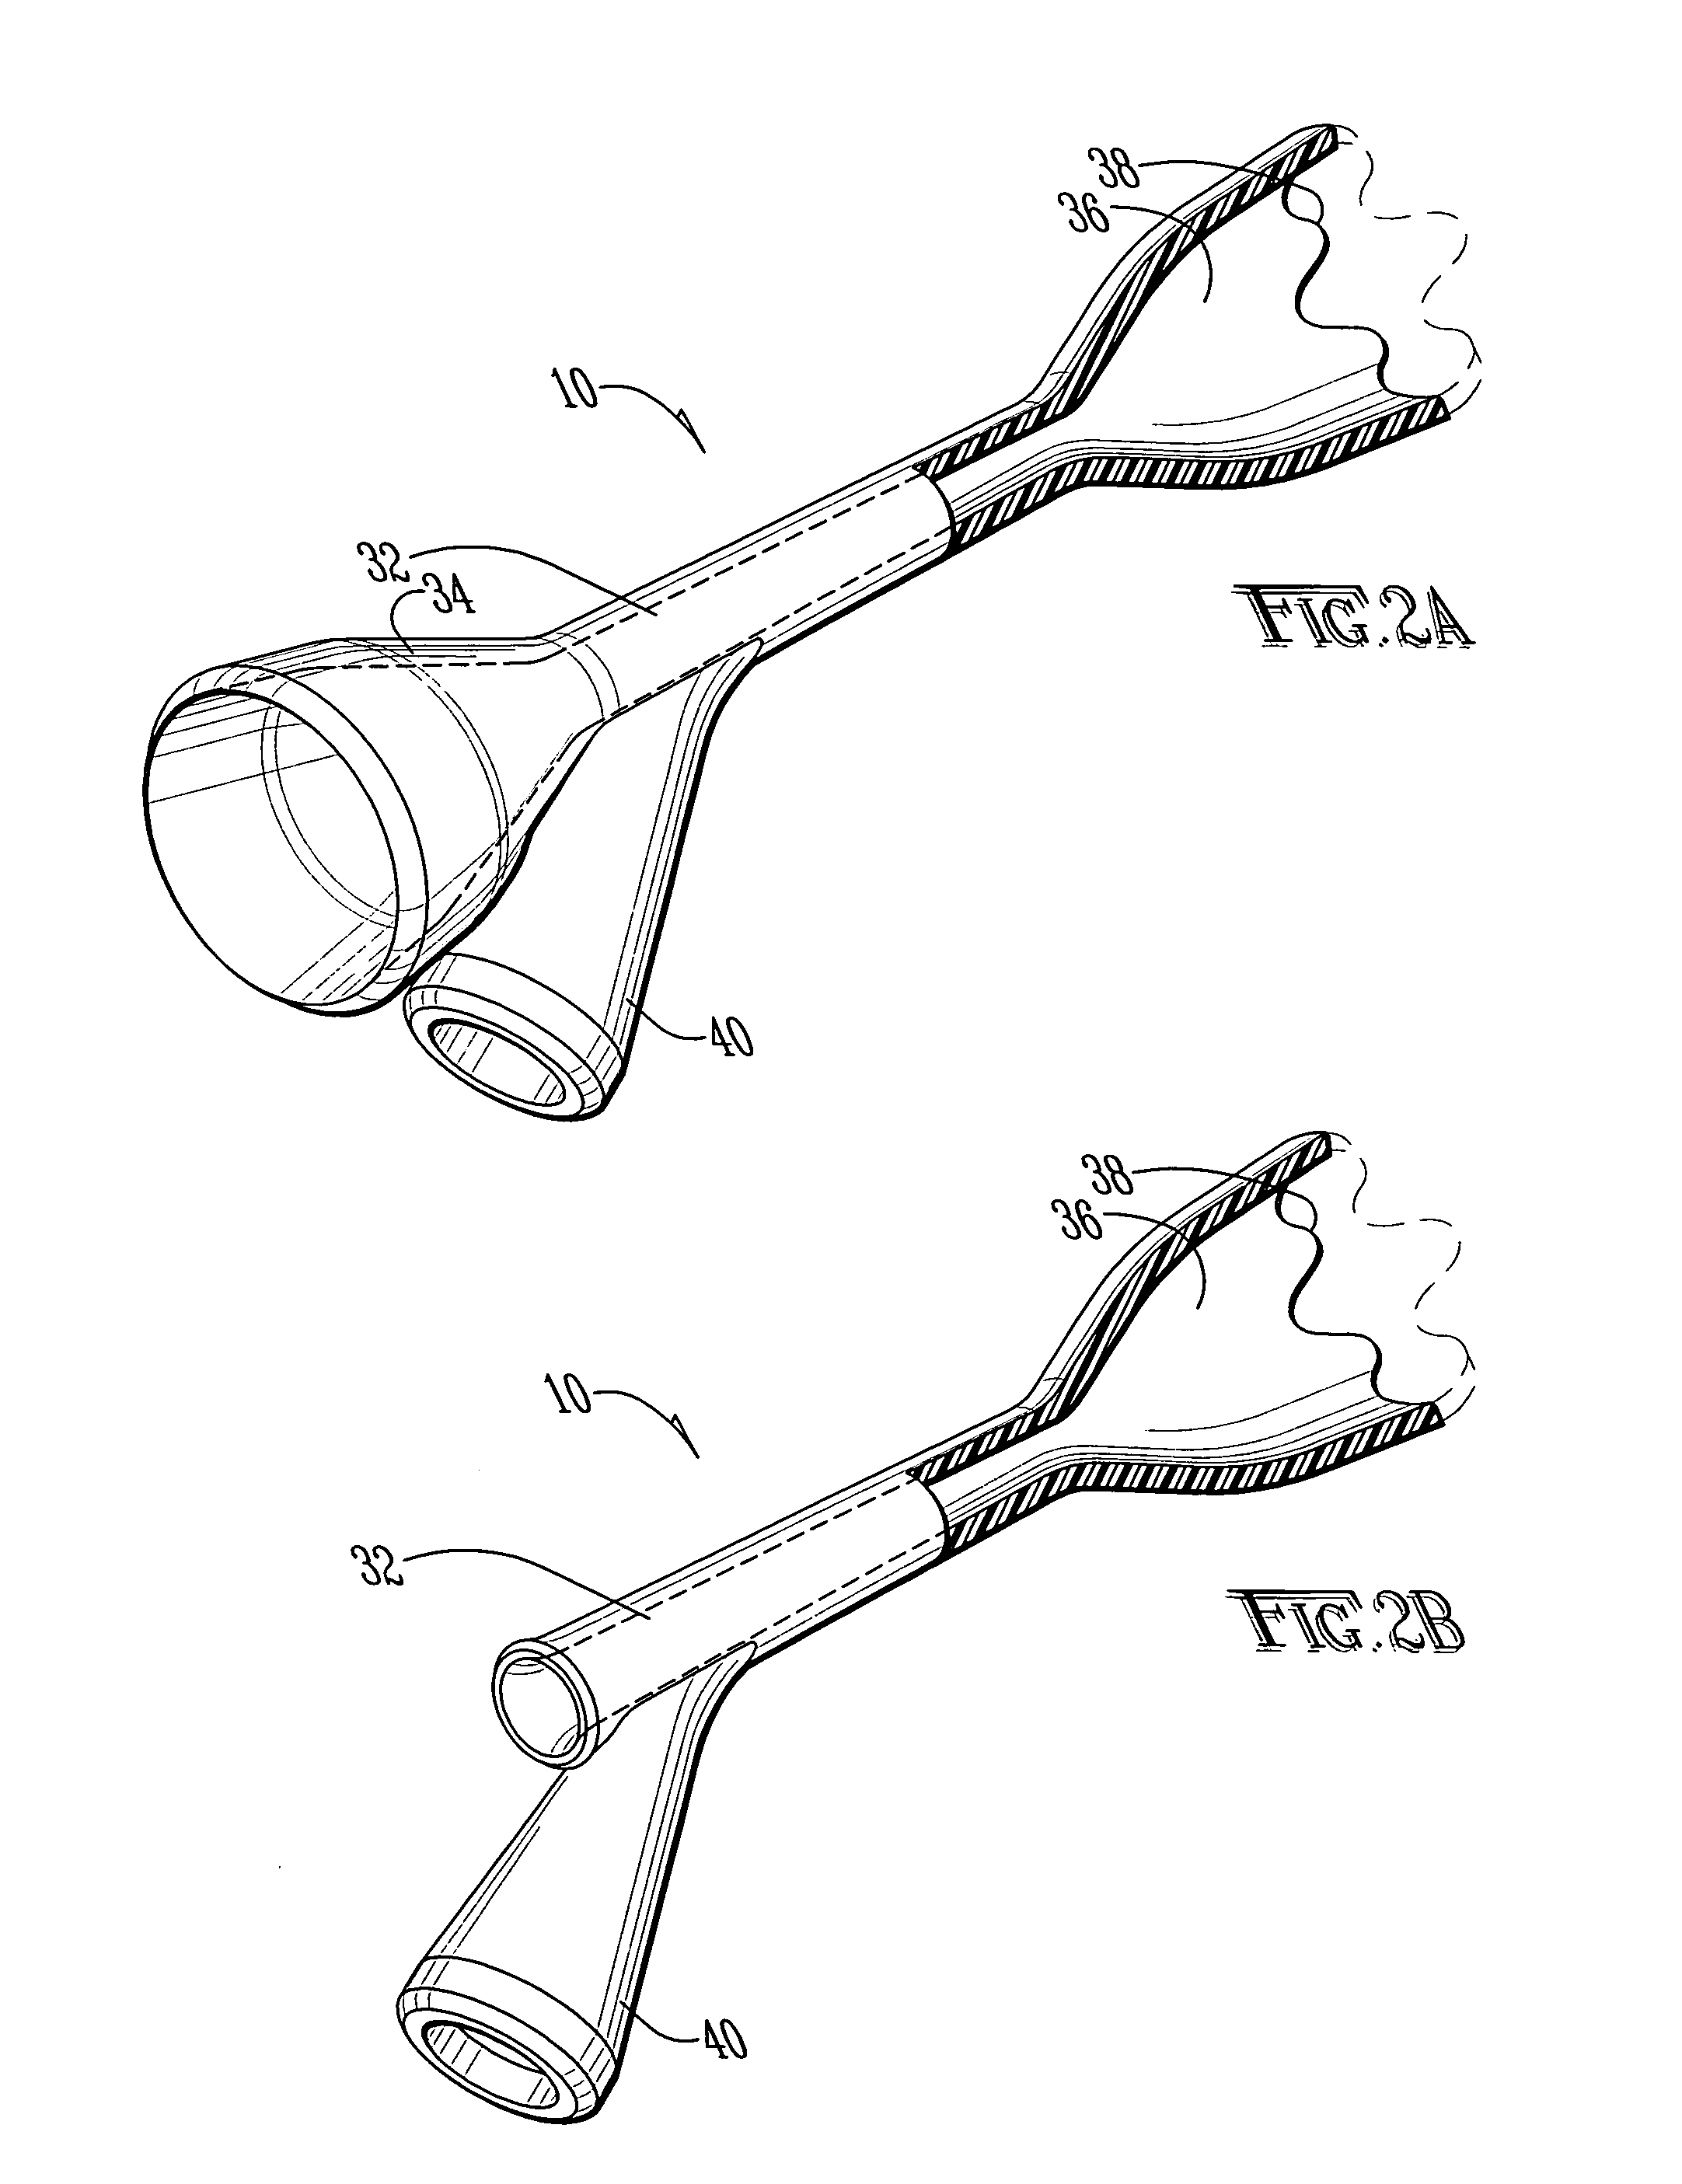 Apparatus and method for reducing or eliminating the pain associated with an injection